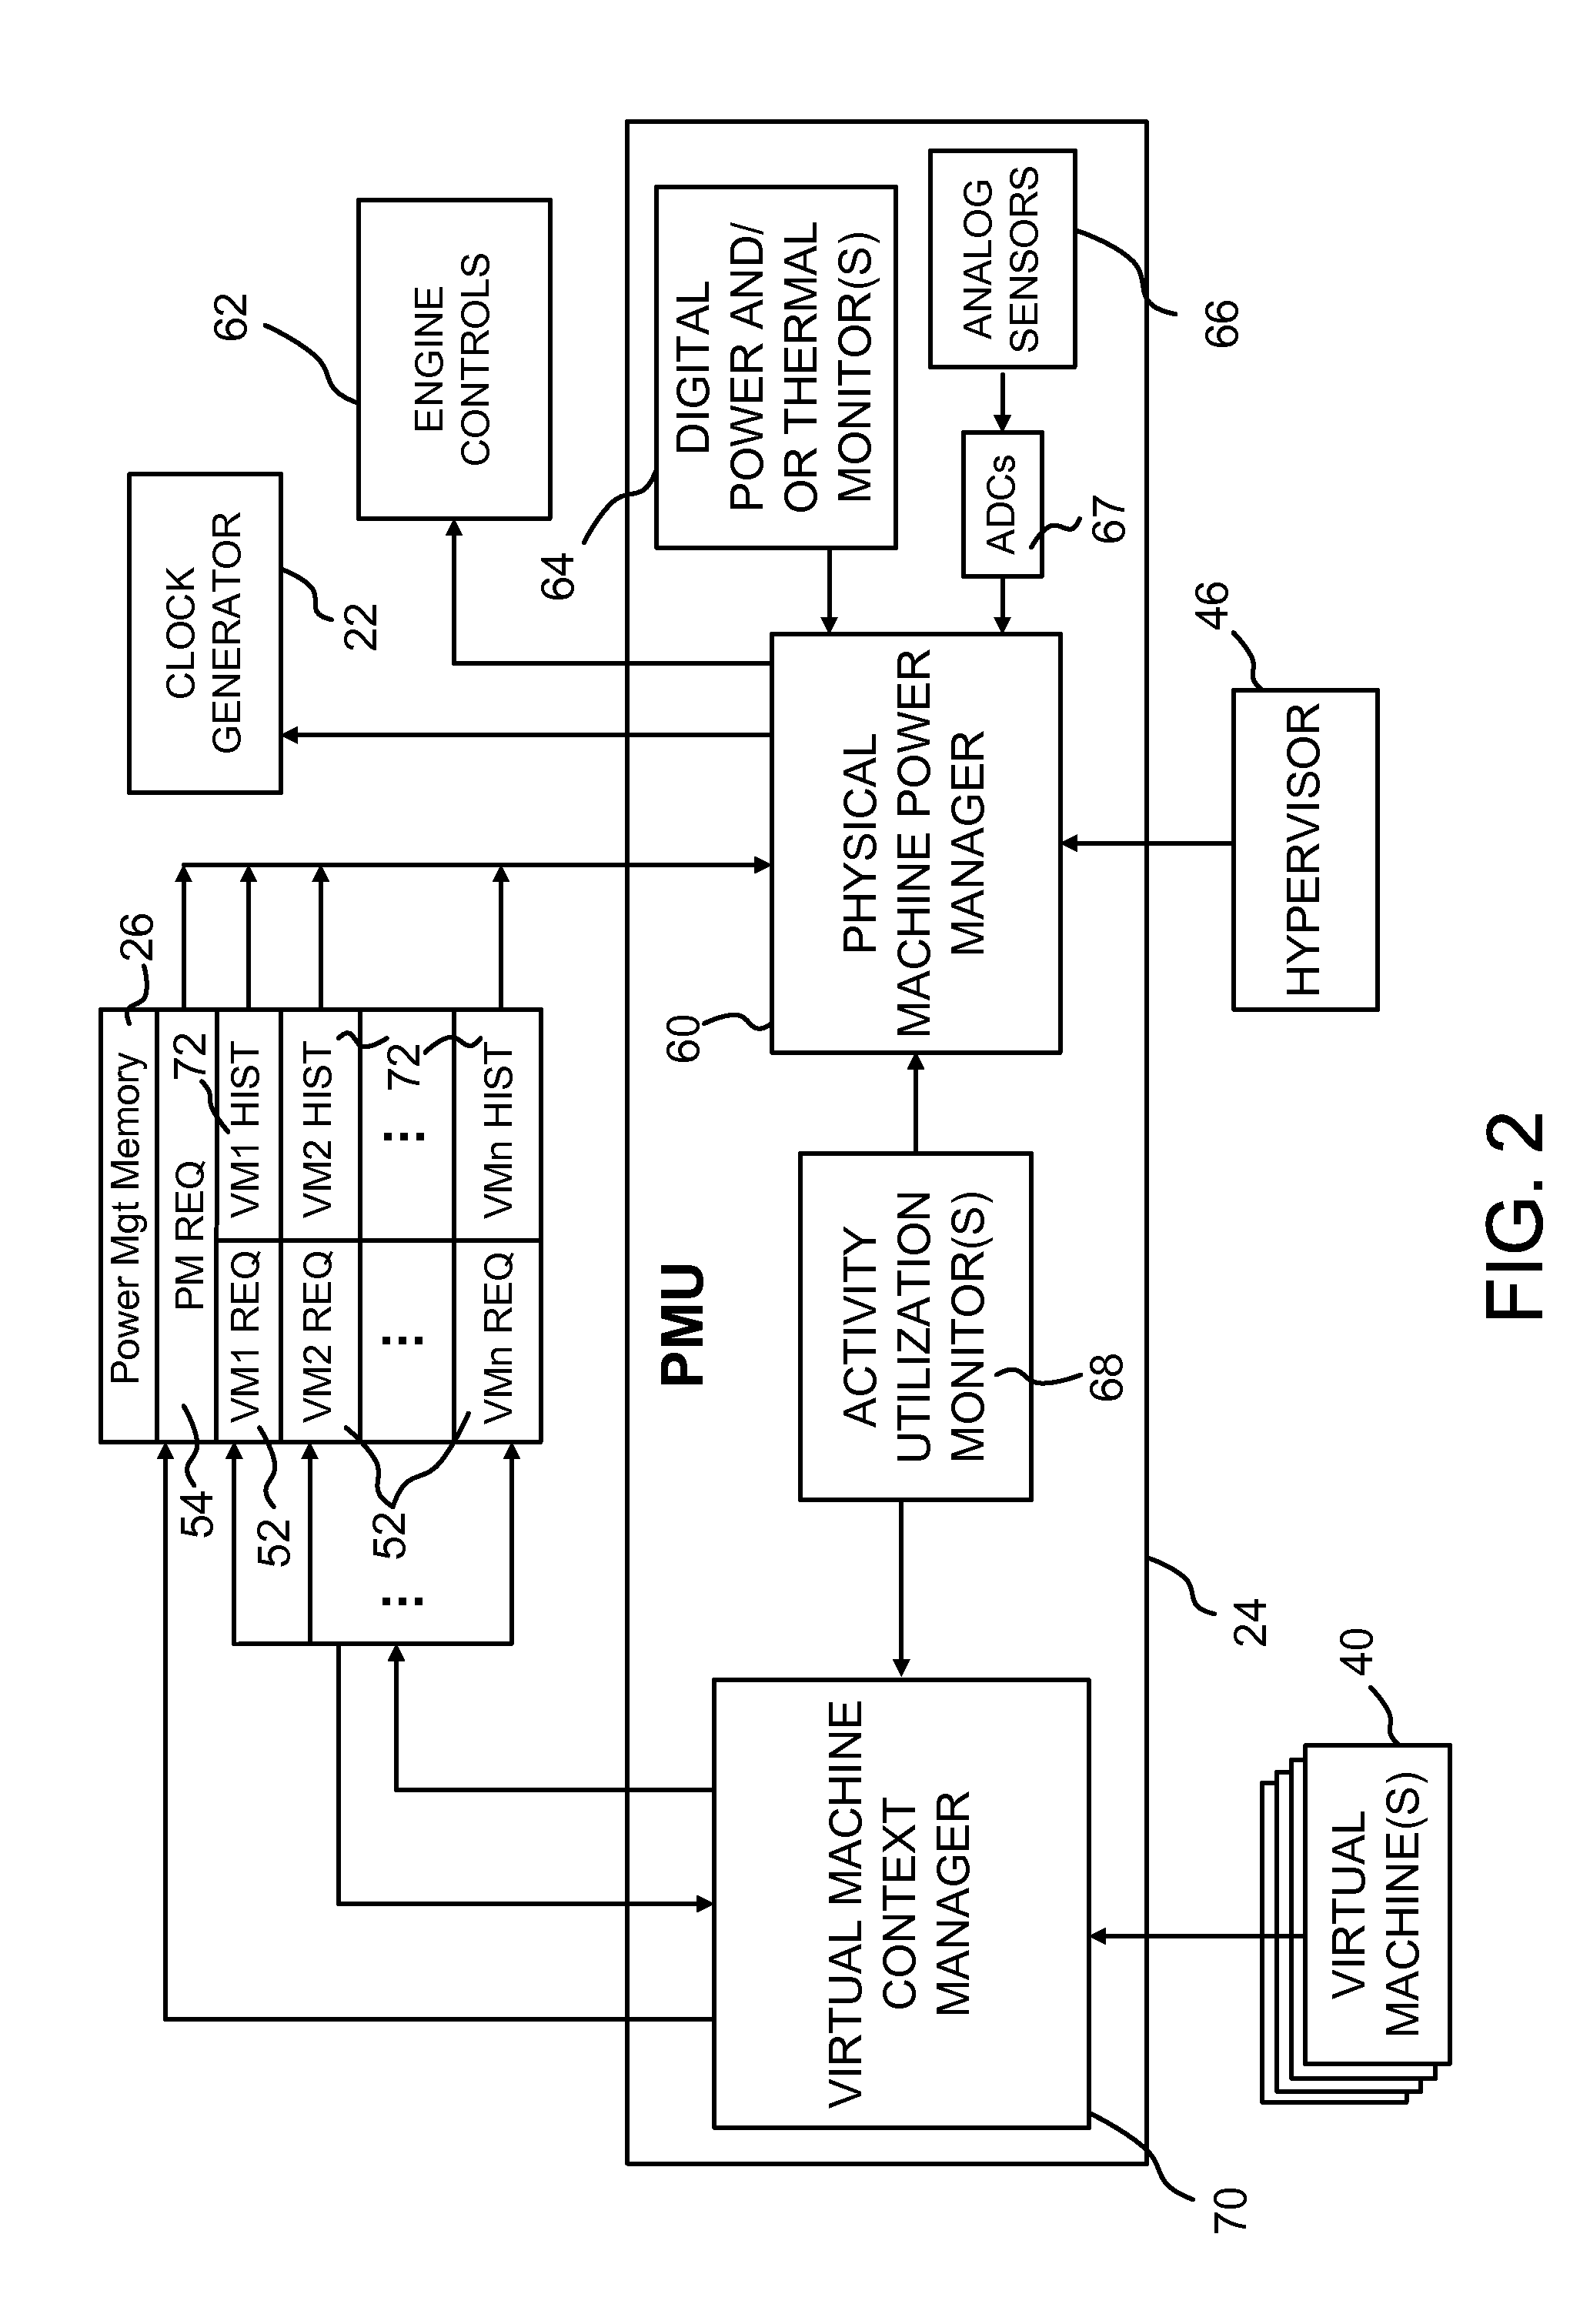 Method and apparatus for power management of a processor in a virtual environment